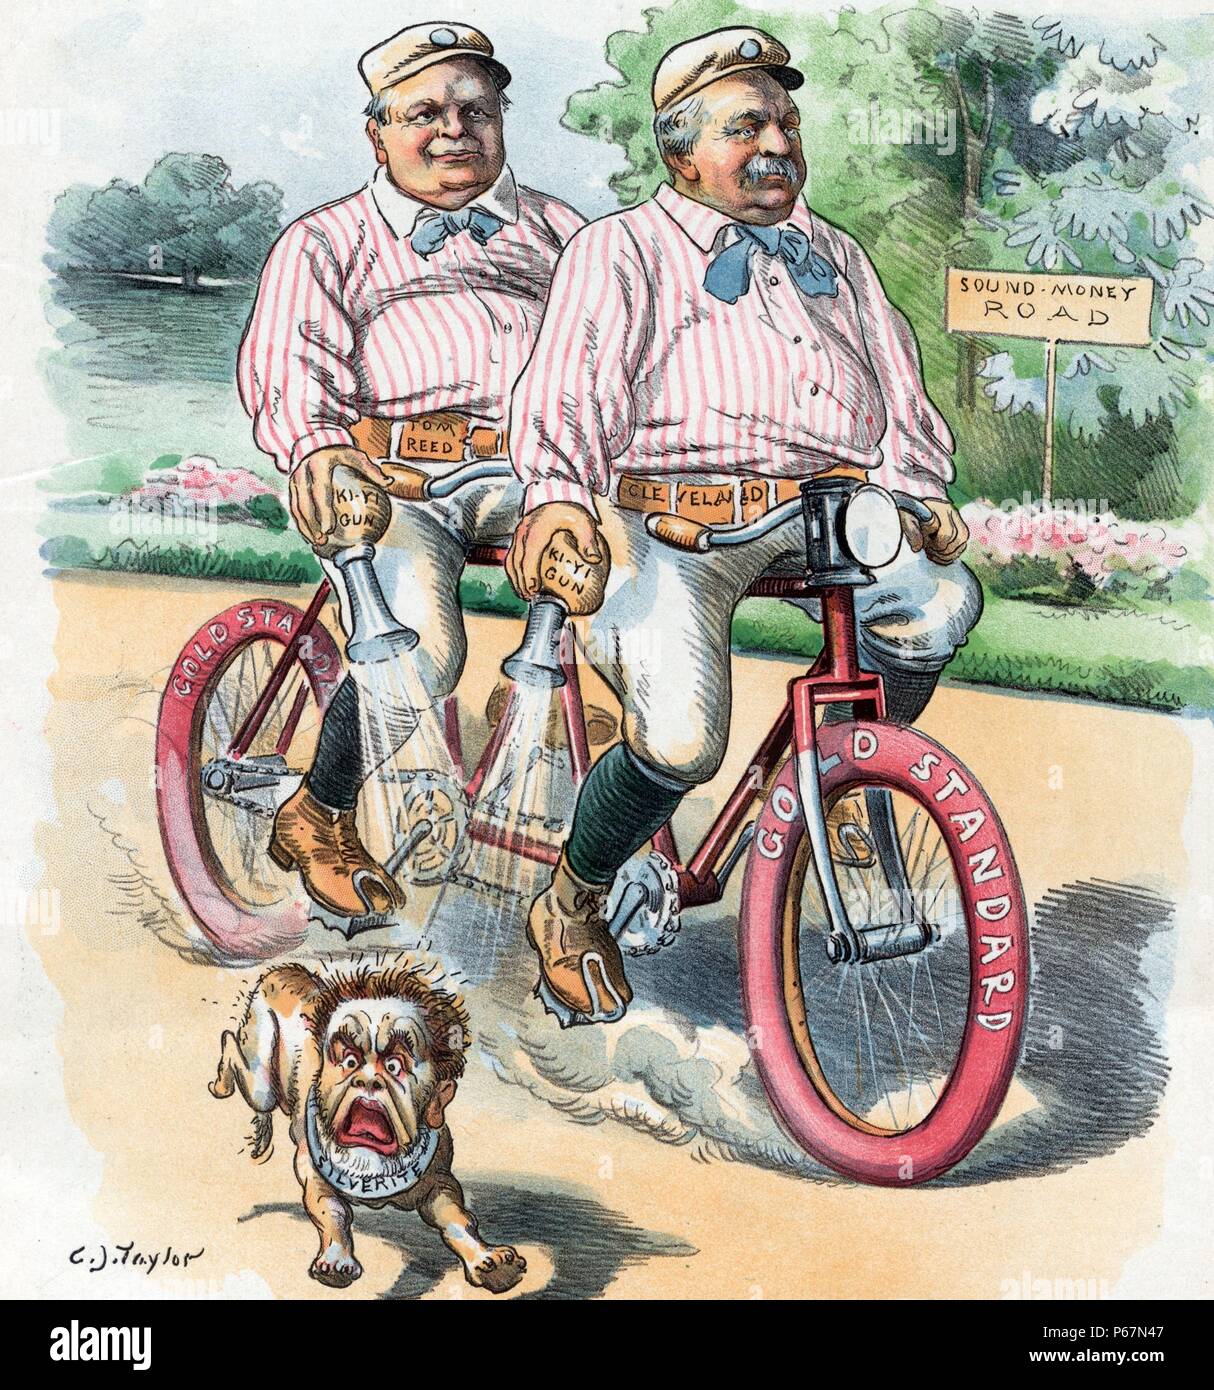 Politics makes strange wheel-fellows' Grover Cleveland and Thomas B. Reed riding down the 'Sound-Money Road' on a bicycle built for two, with tires labelled 'Gold Standard', and honking horns labelled 'Ki-Yi Gun' at a small dog labelled 'Silverite'. Stock Photo